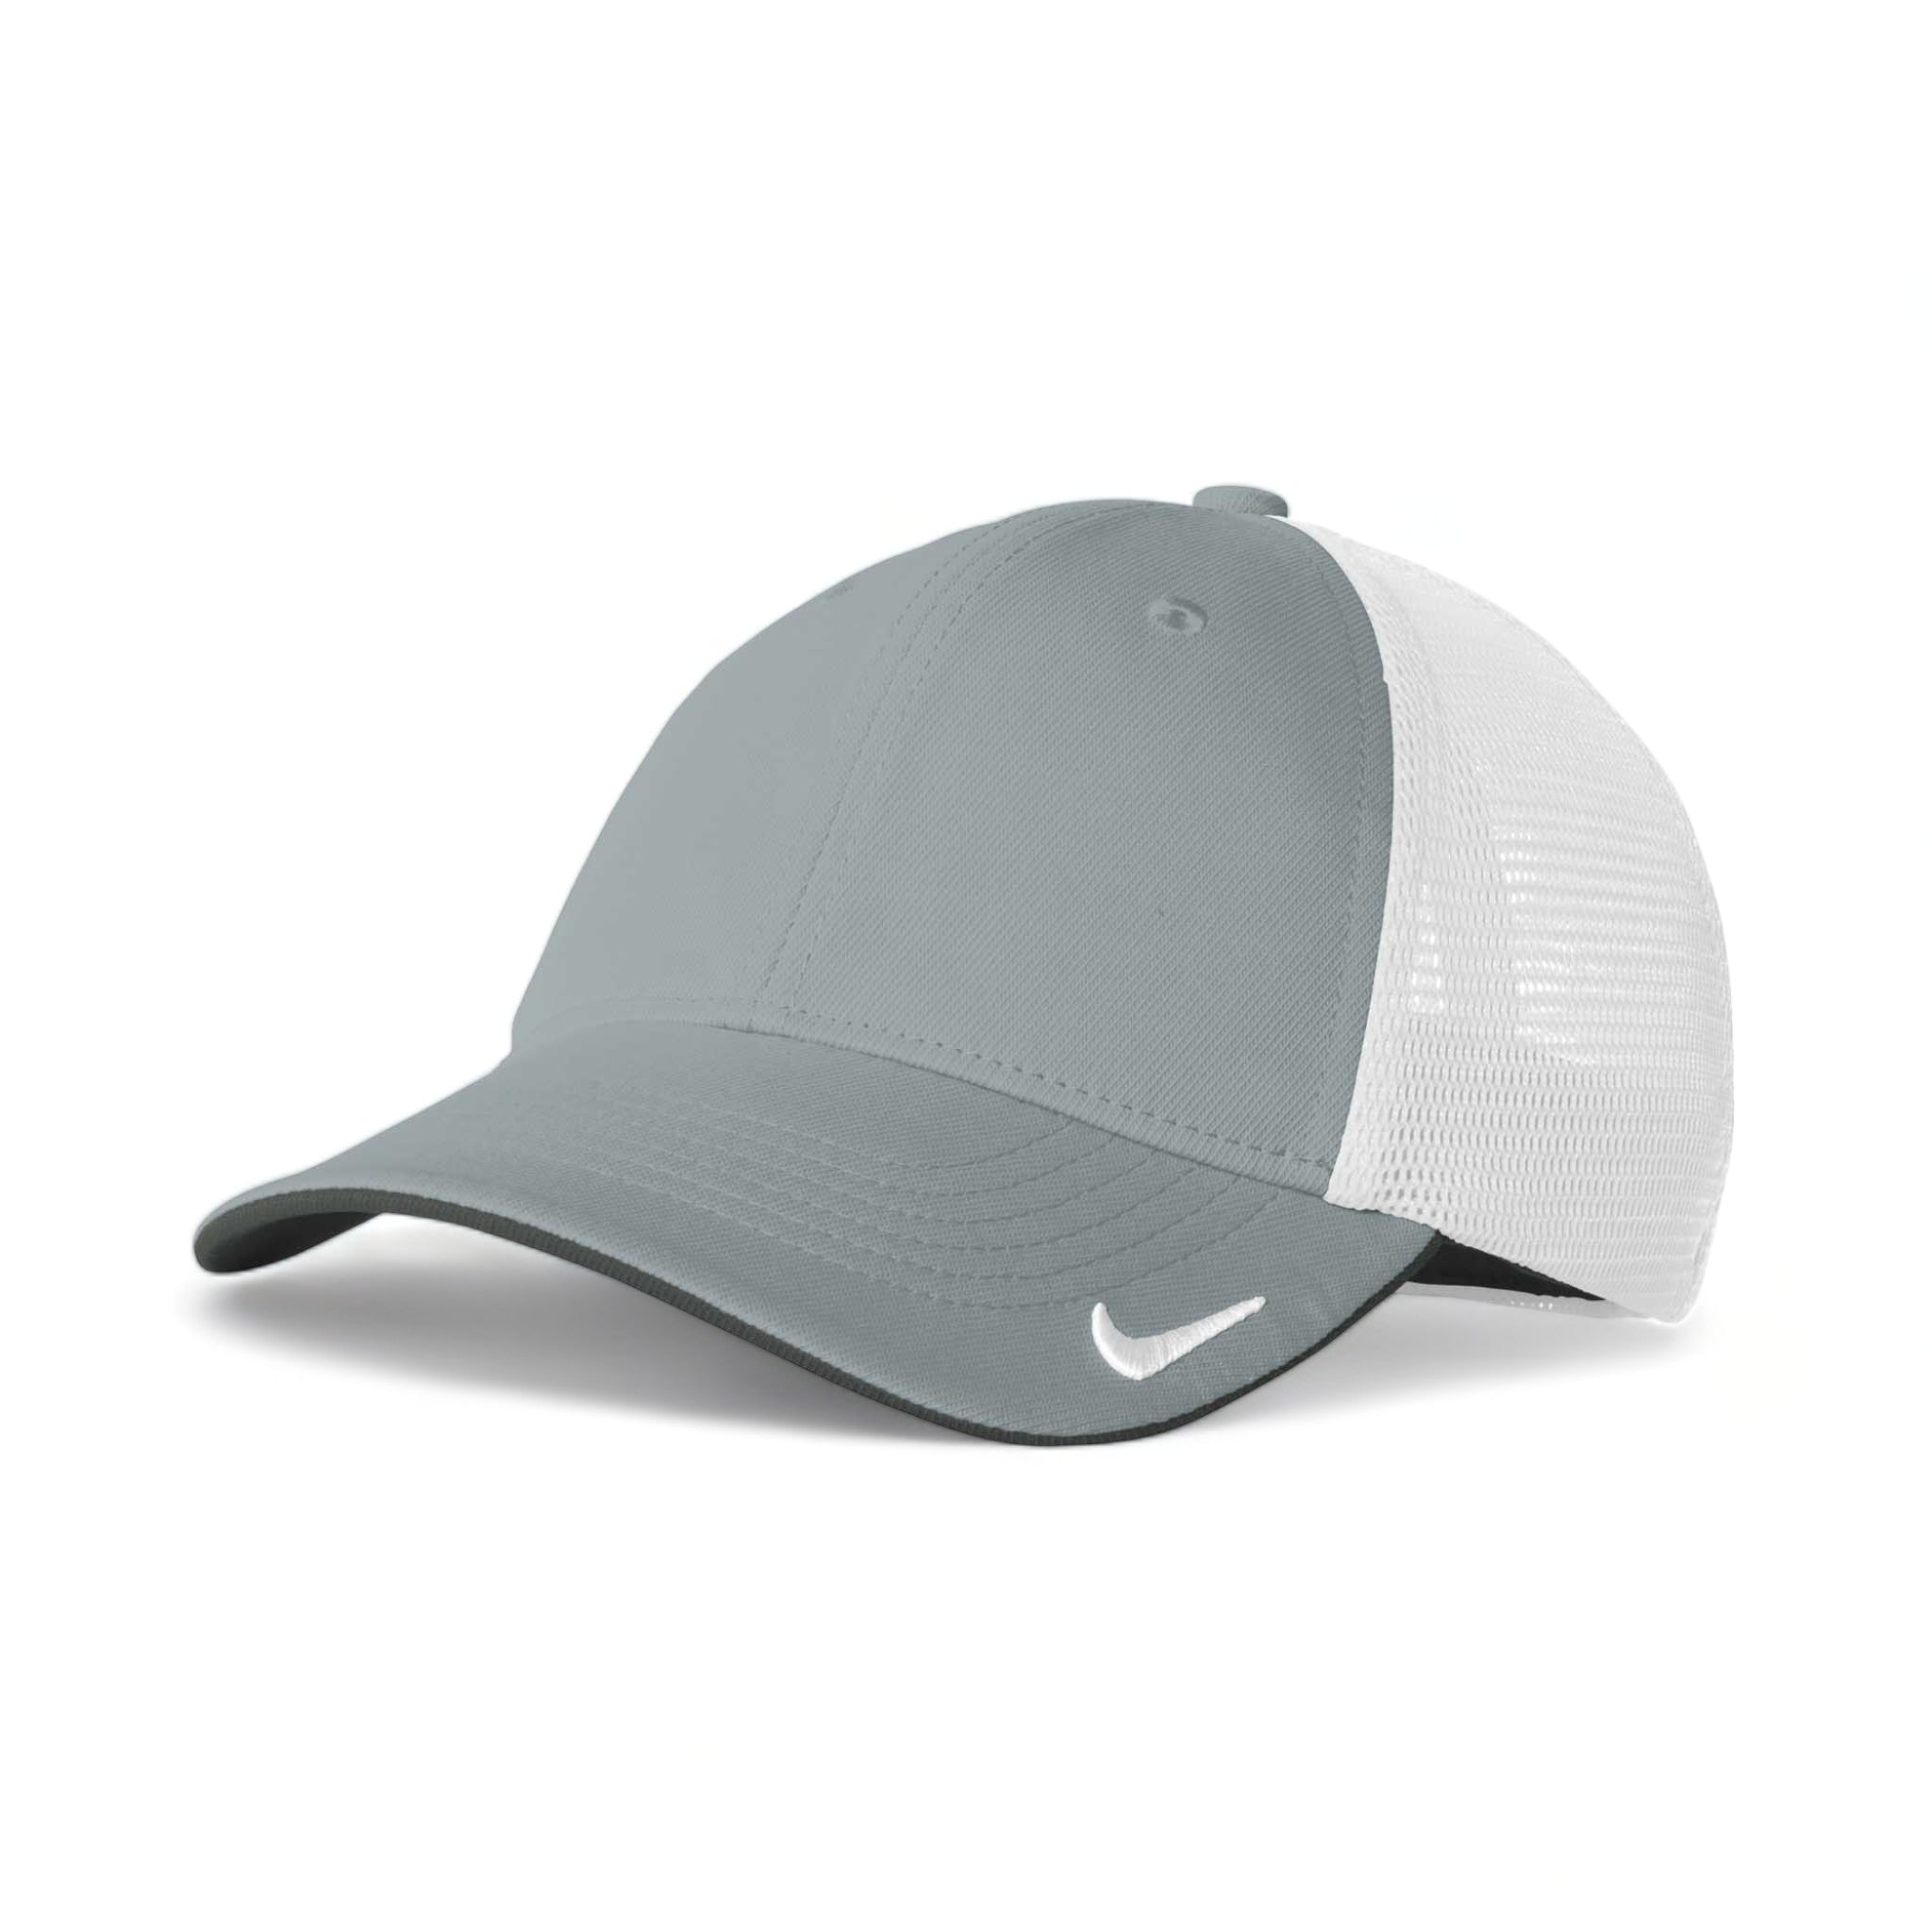 Side view of Nike NKFB6448 custom hat in cool grey and white